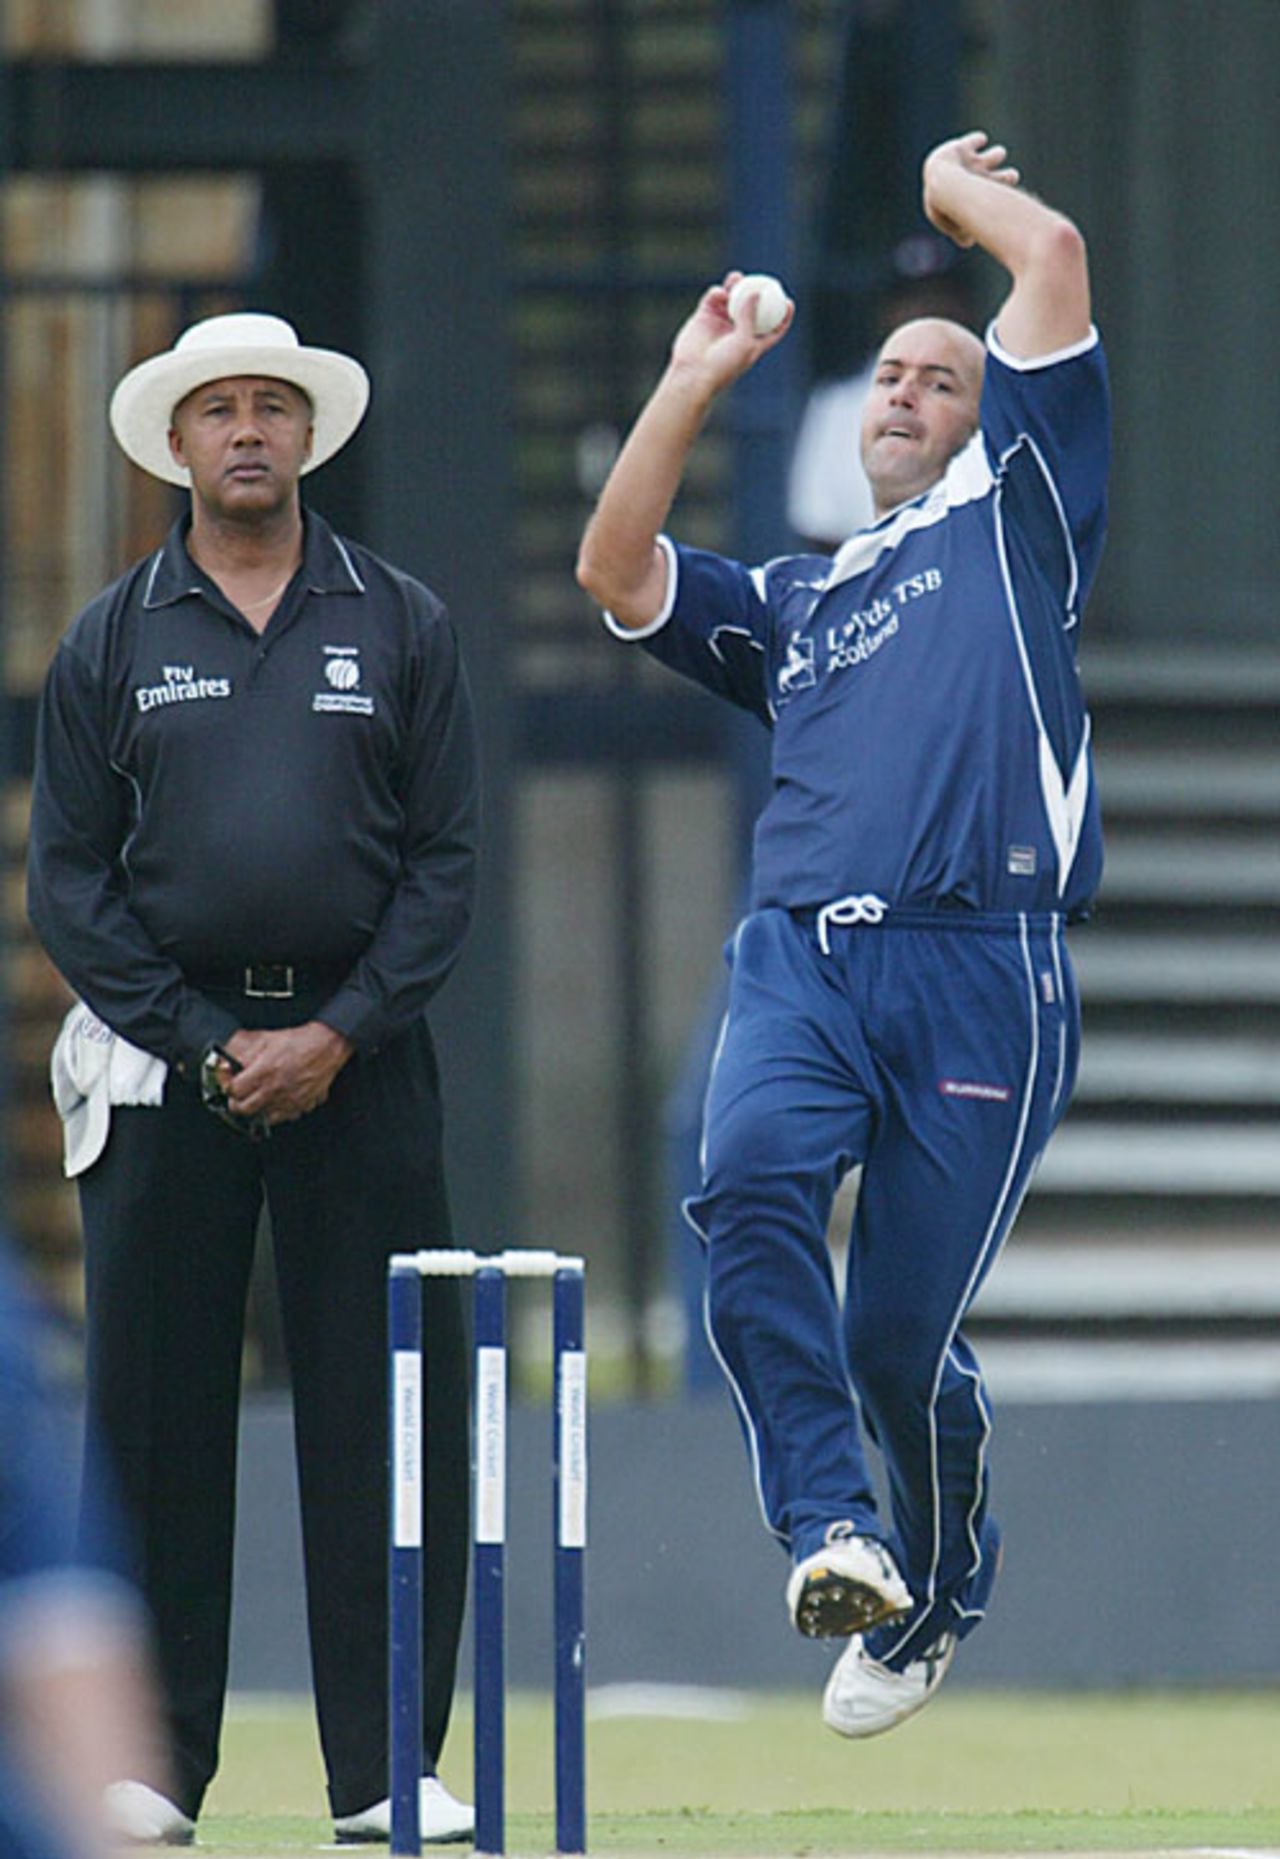 Paul Hoffmann took 1 for 21 in his opening spell, Ireland v Scotland, Nairobi Gymkhana, WCL, January 30, 2007 